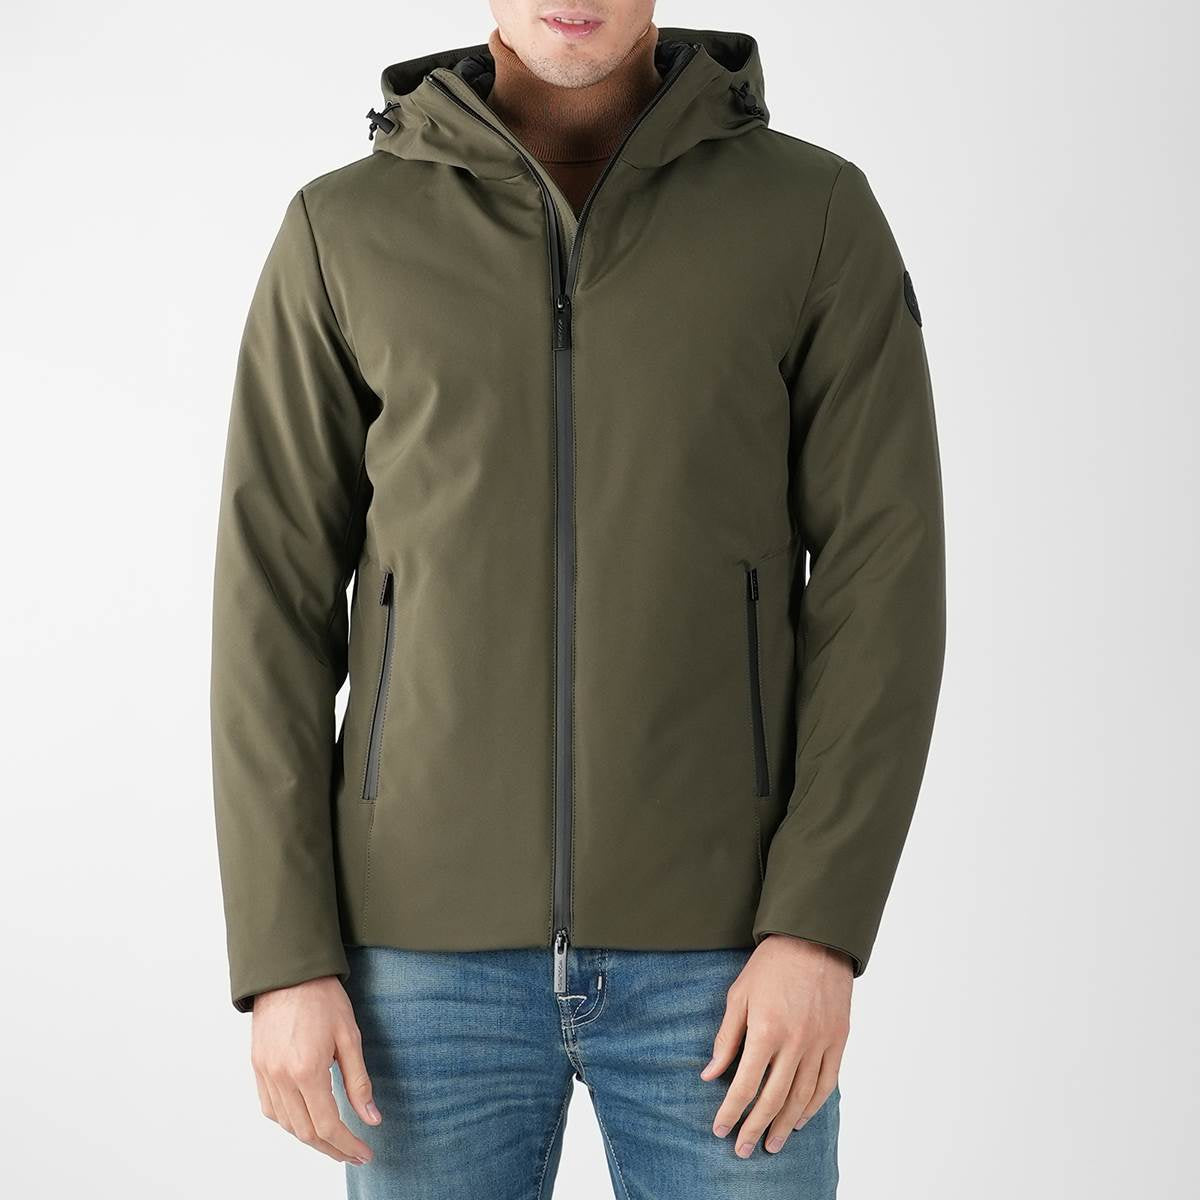 Woolrich green pl pacific soft shell coat